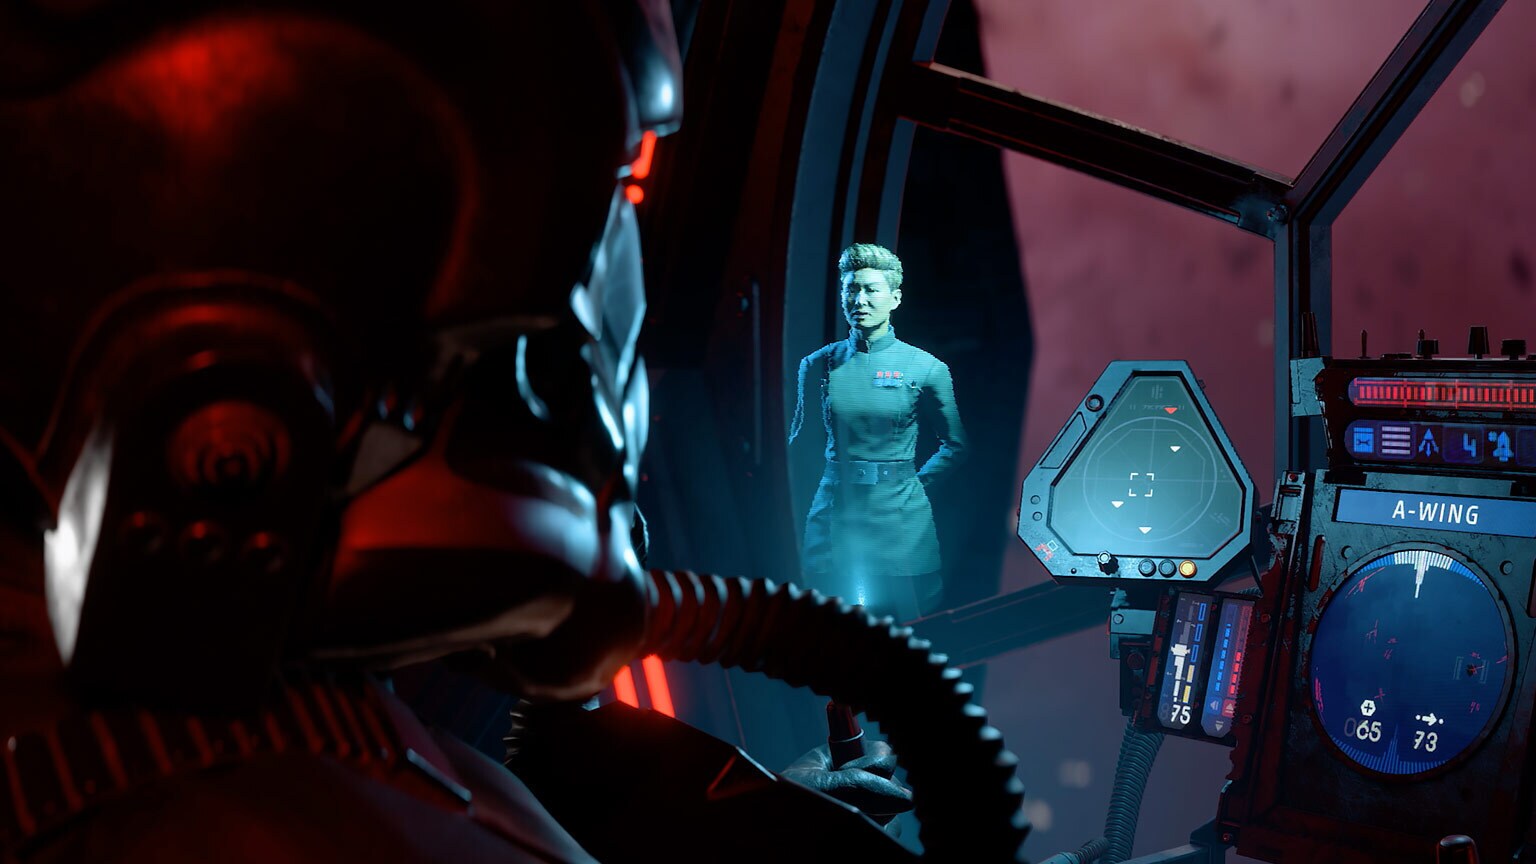 6 Highlights from the Star Wars: Squadrons Gameplay Trailer